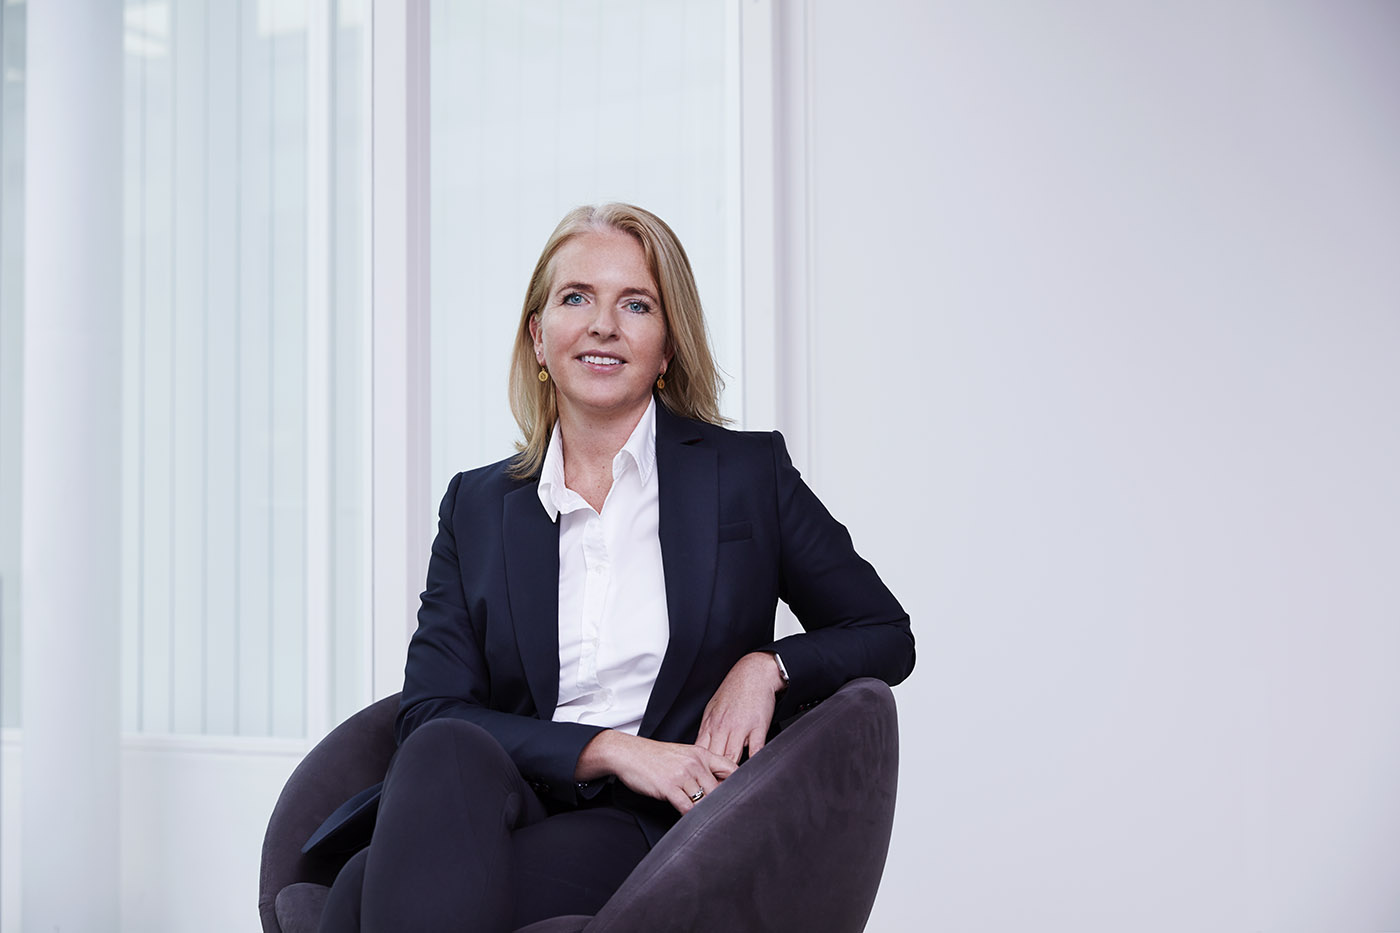 Ellen Furru, Visma COO, sits in a chair and smiles at the camera.